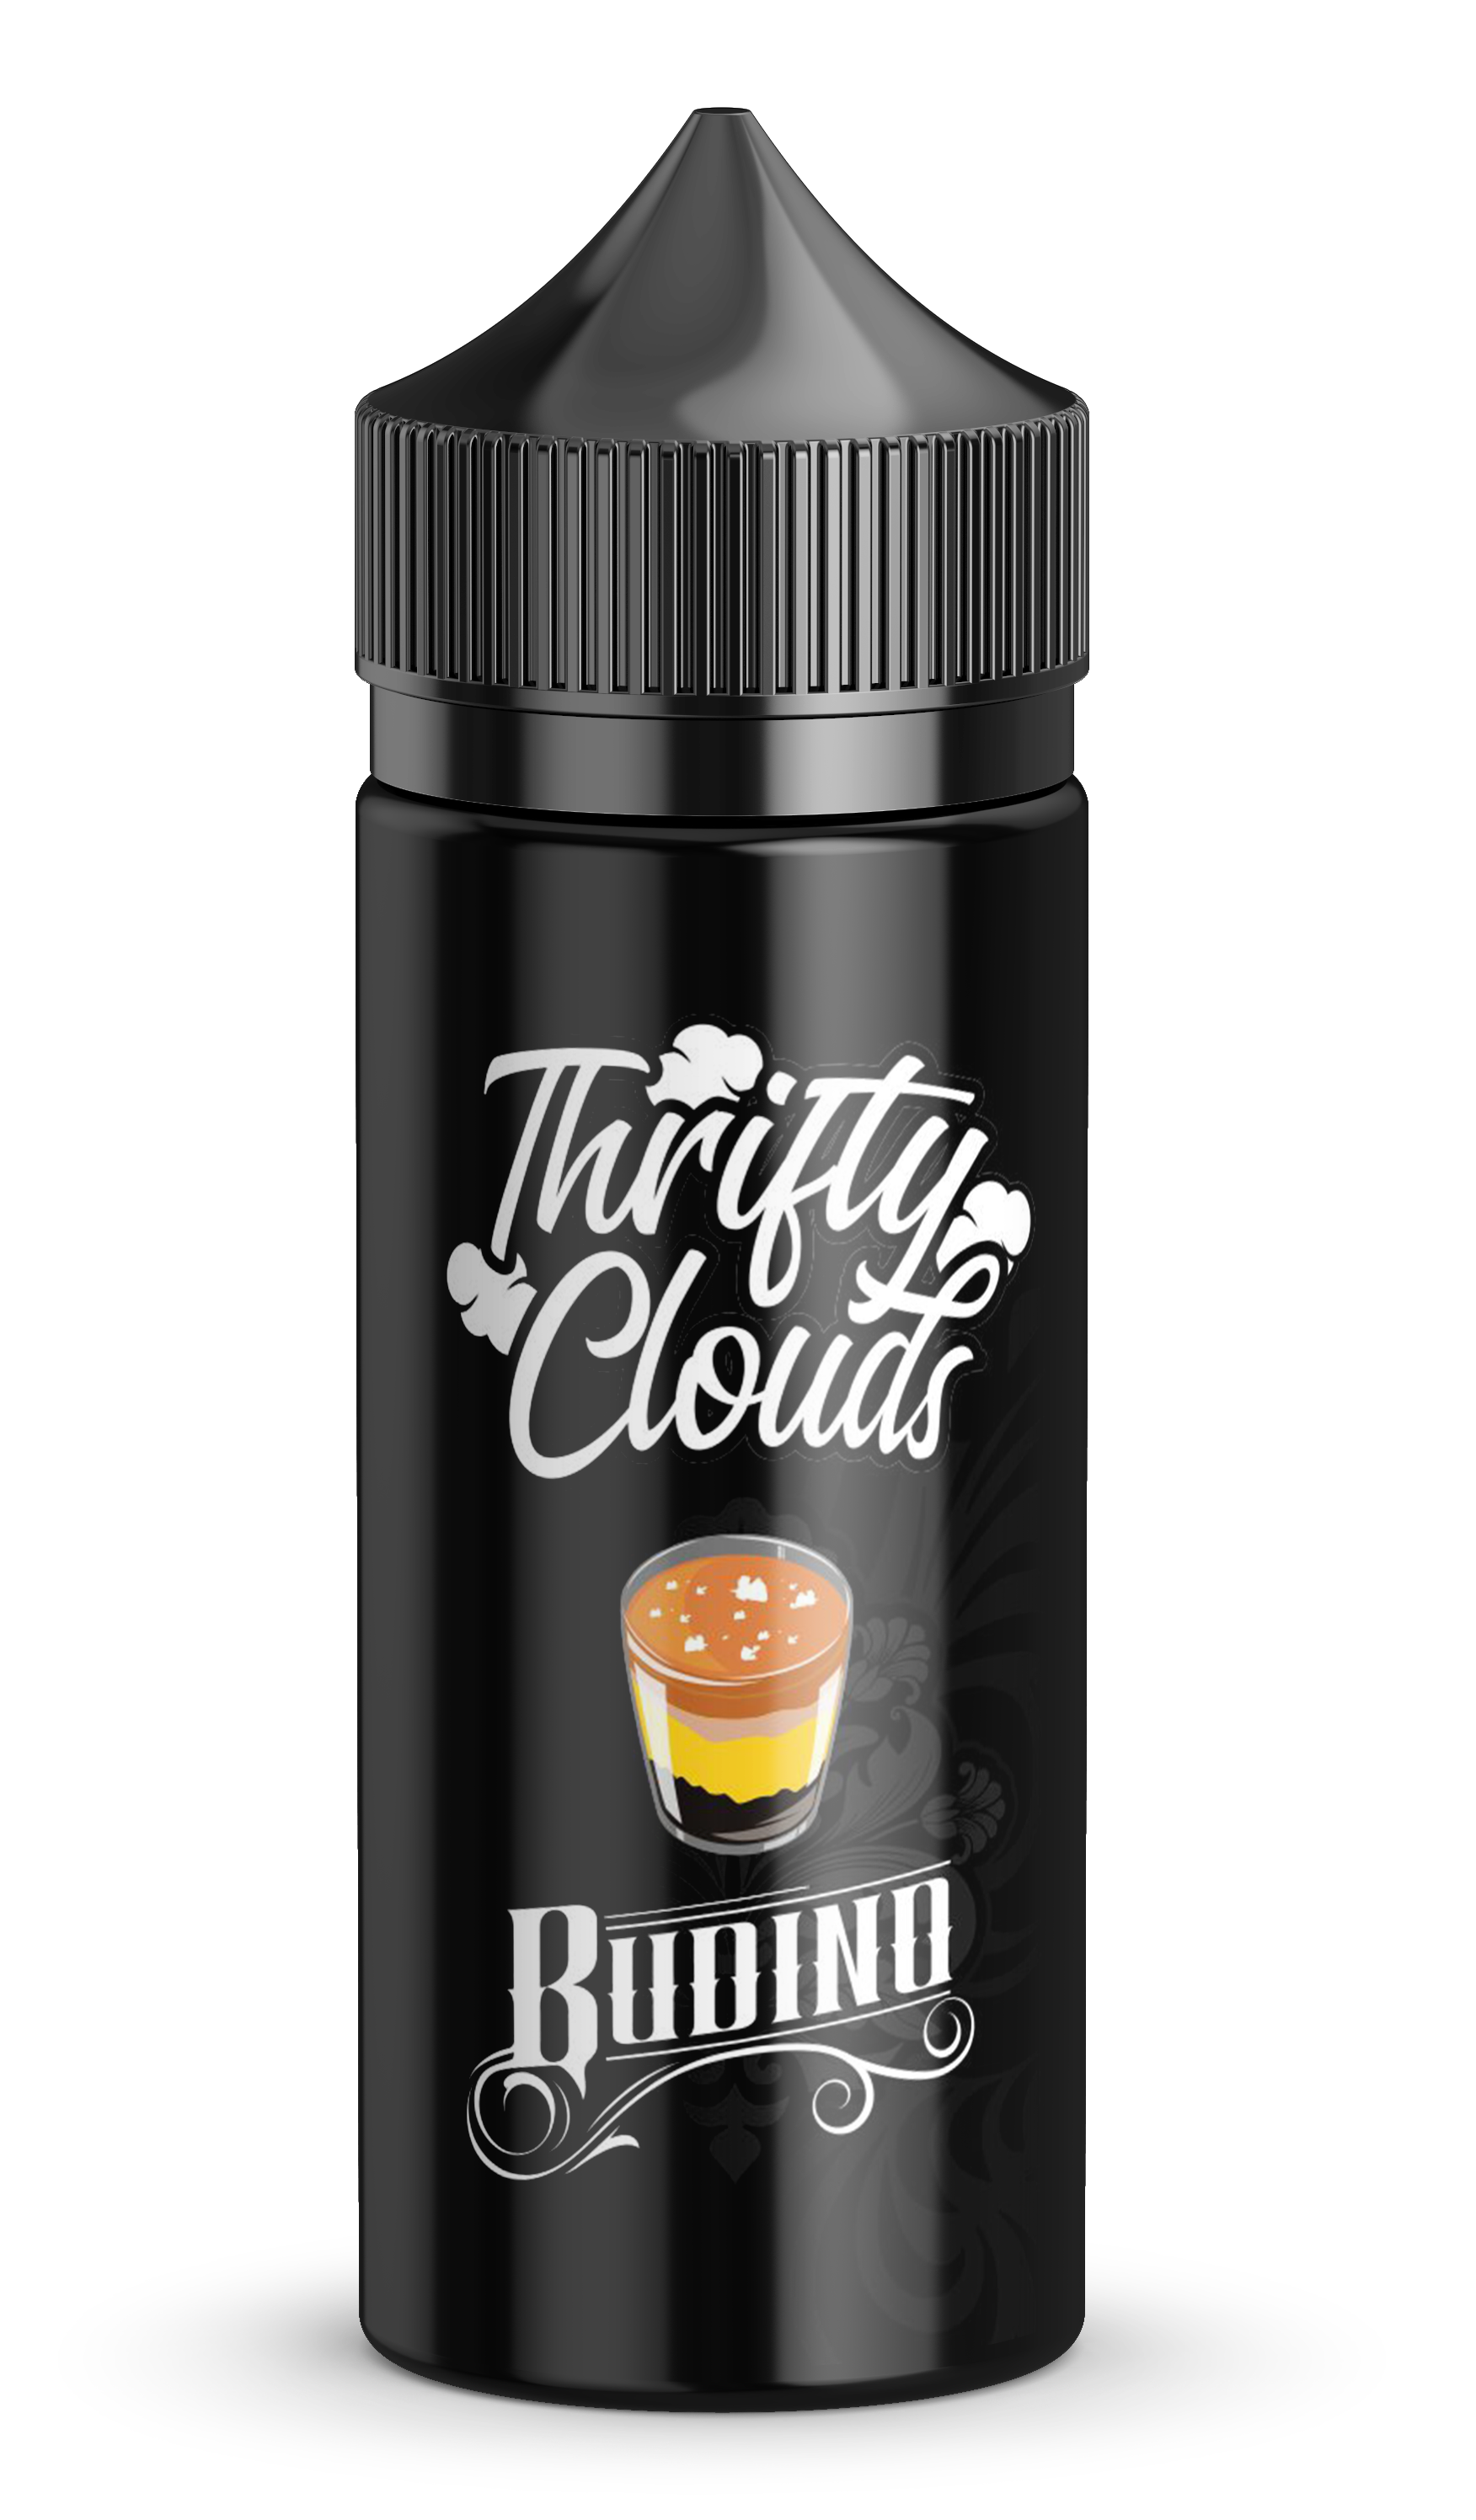 Budino by Thrifty Clouds 100ml